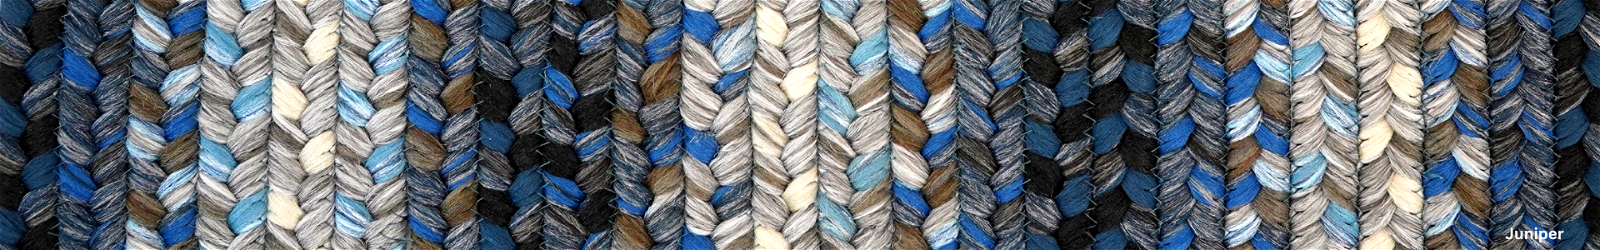 Cotton - Blue Braided Rugs